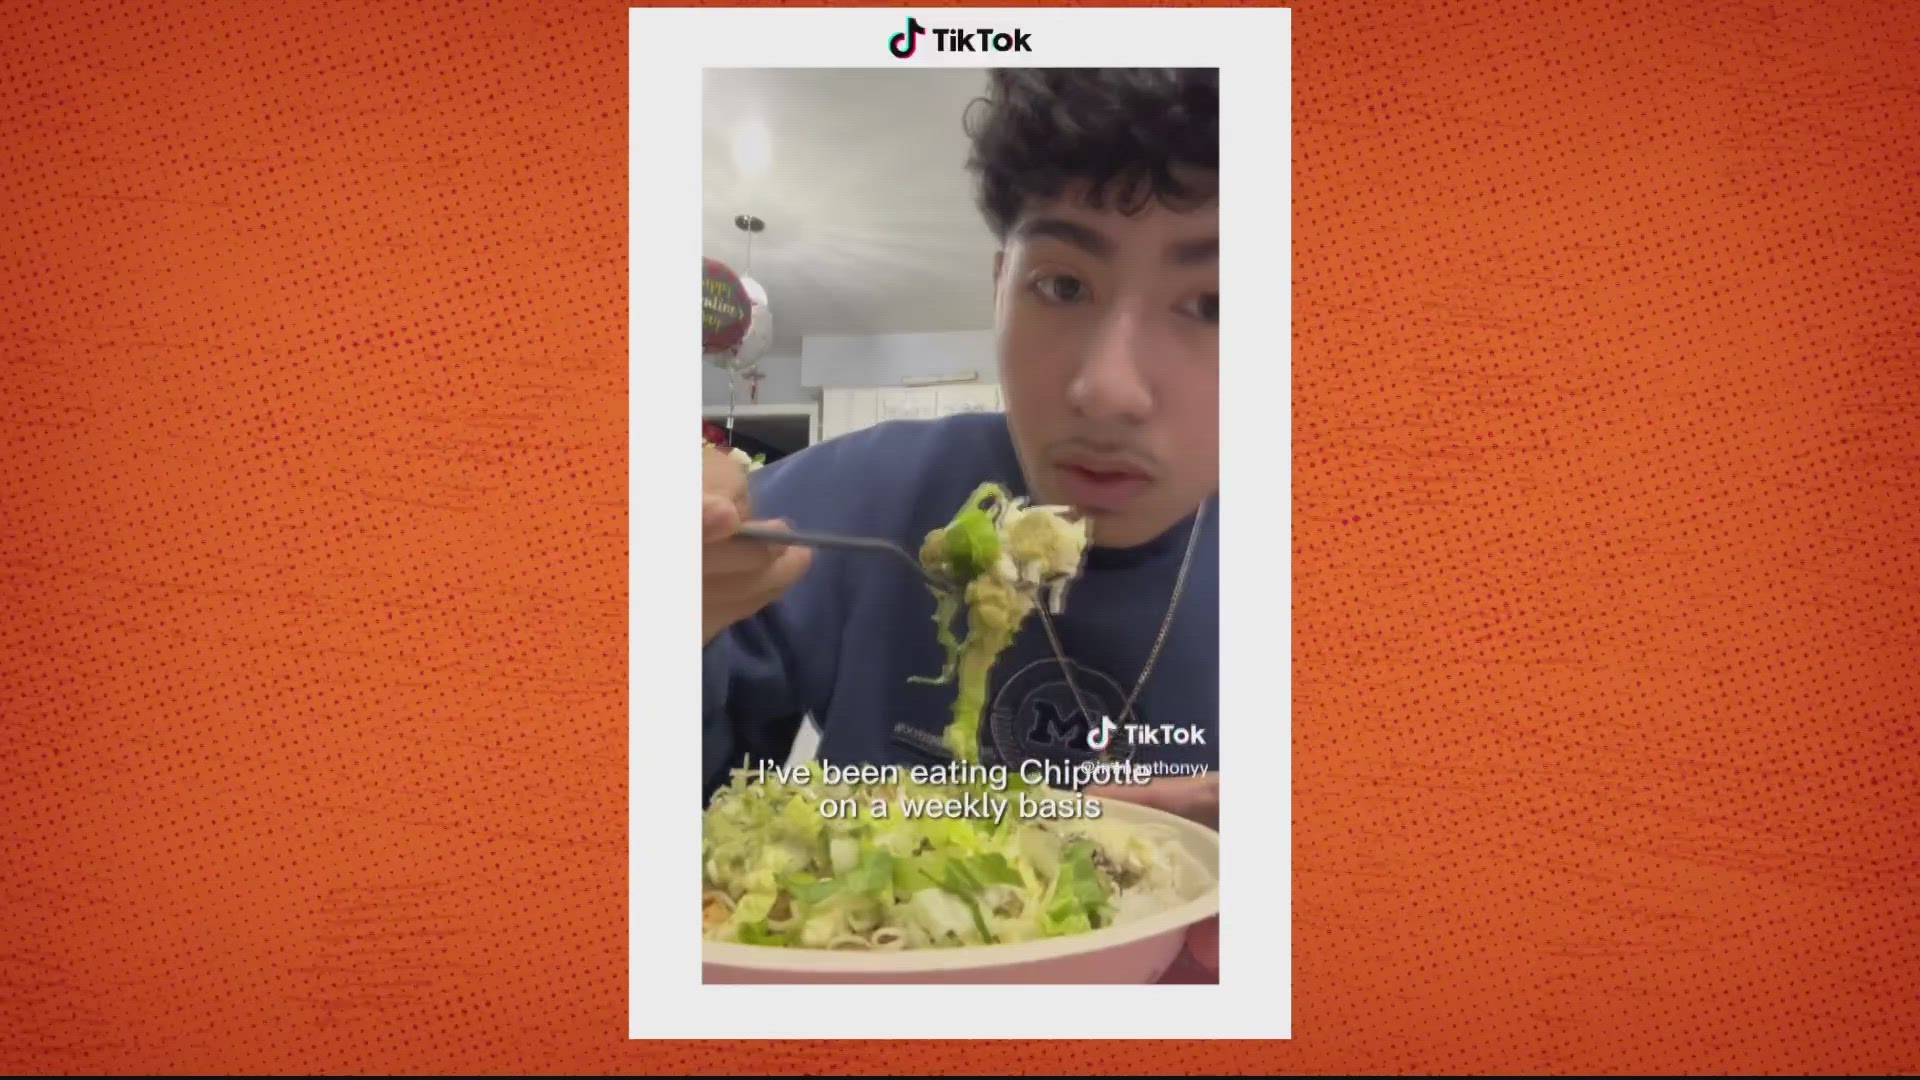 Fast casual restaurant Chipotle recently teamed up with TikTok food critic Keith Lee for the Chipotle Taste Test.